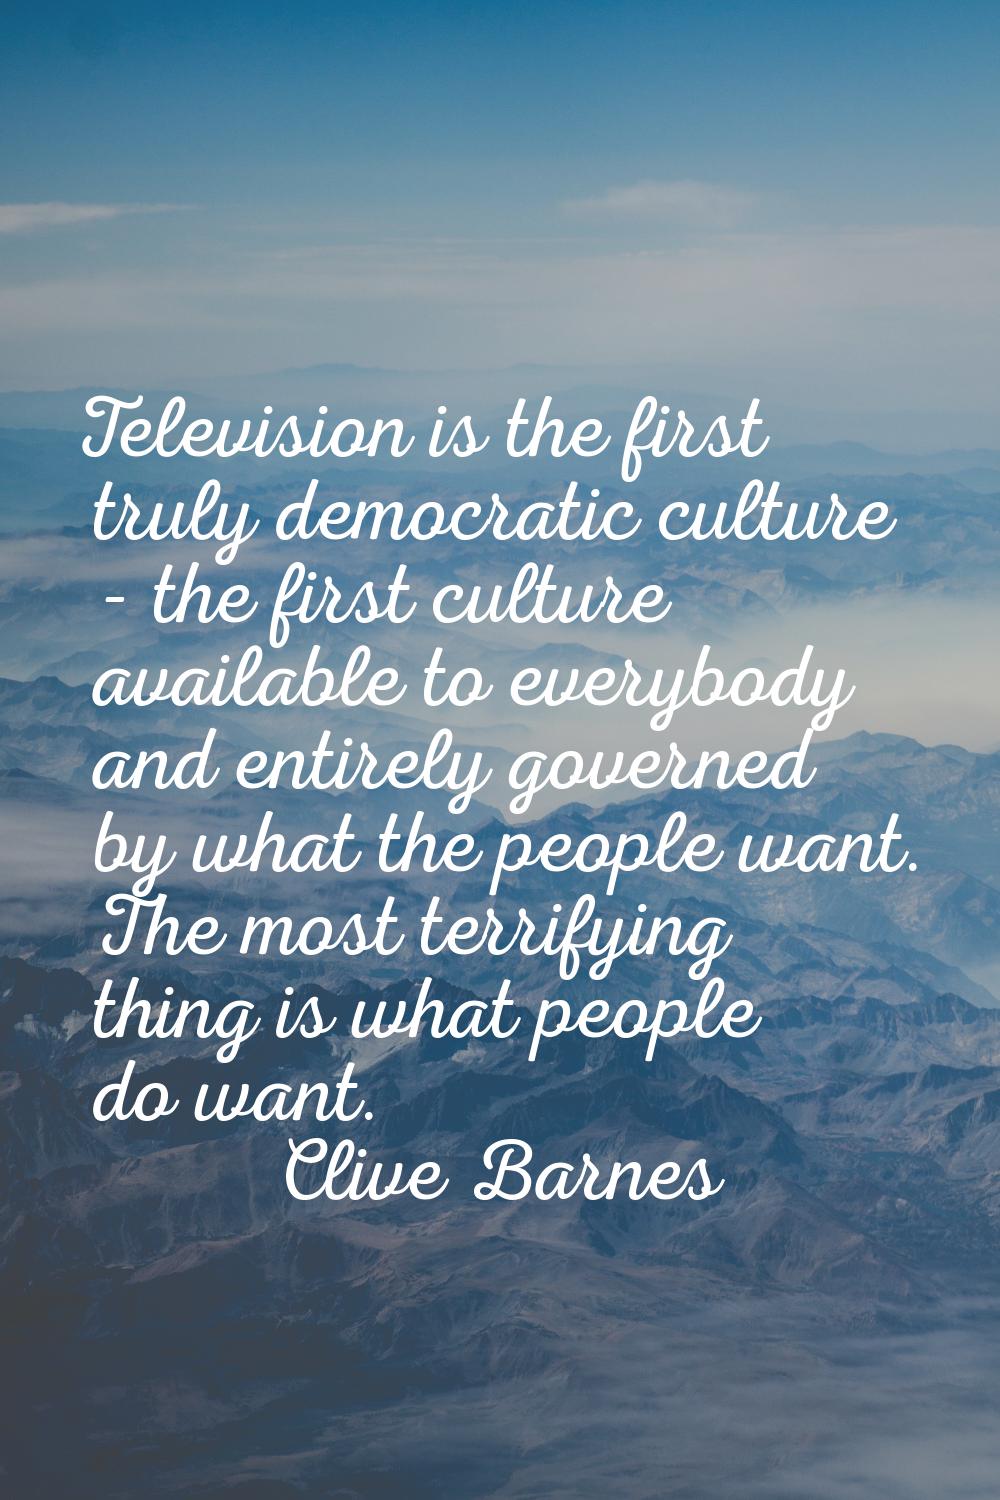 Television is the first truly democratic culture - the first culture available to everybody and ent